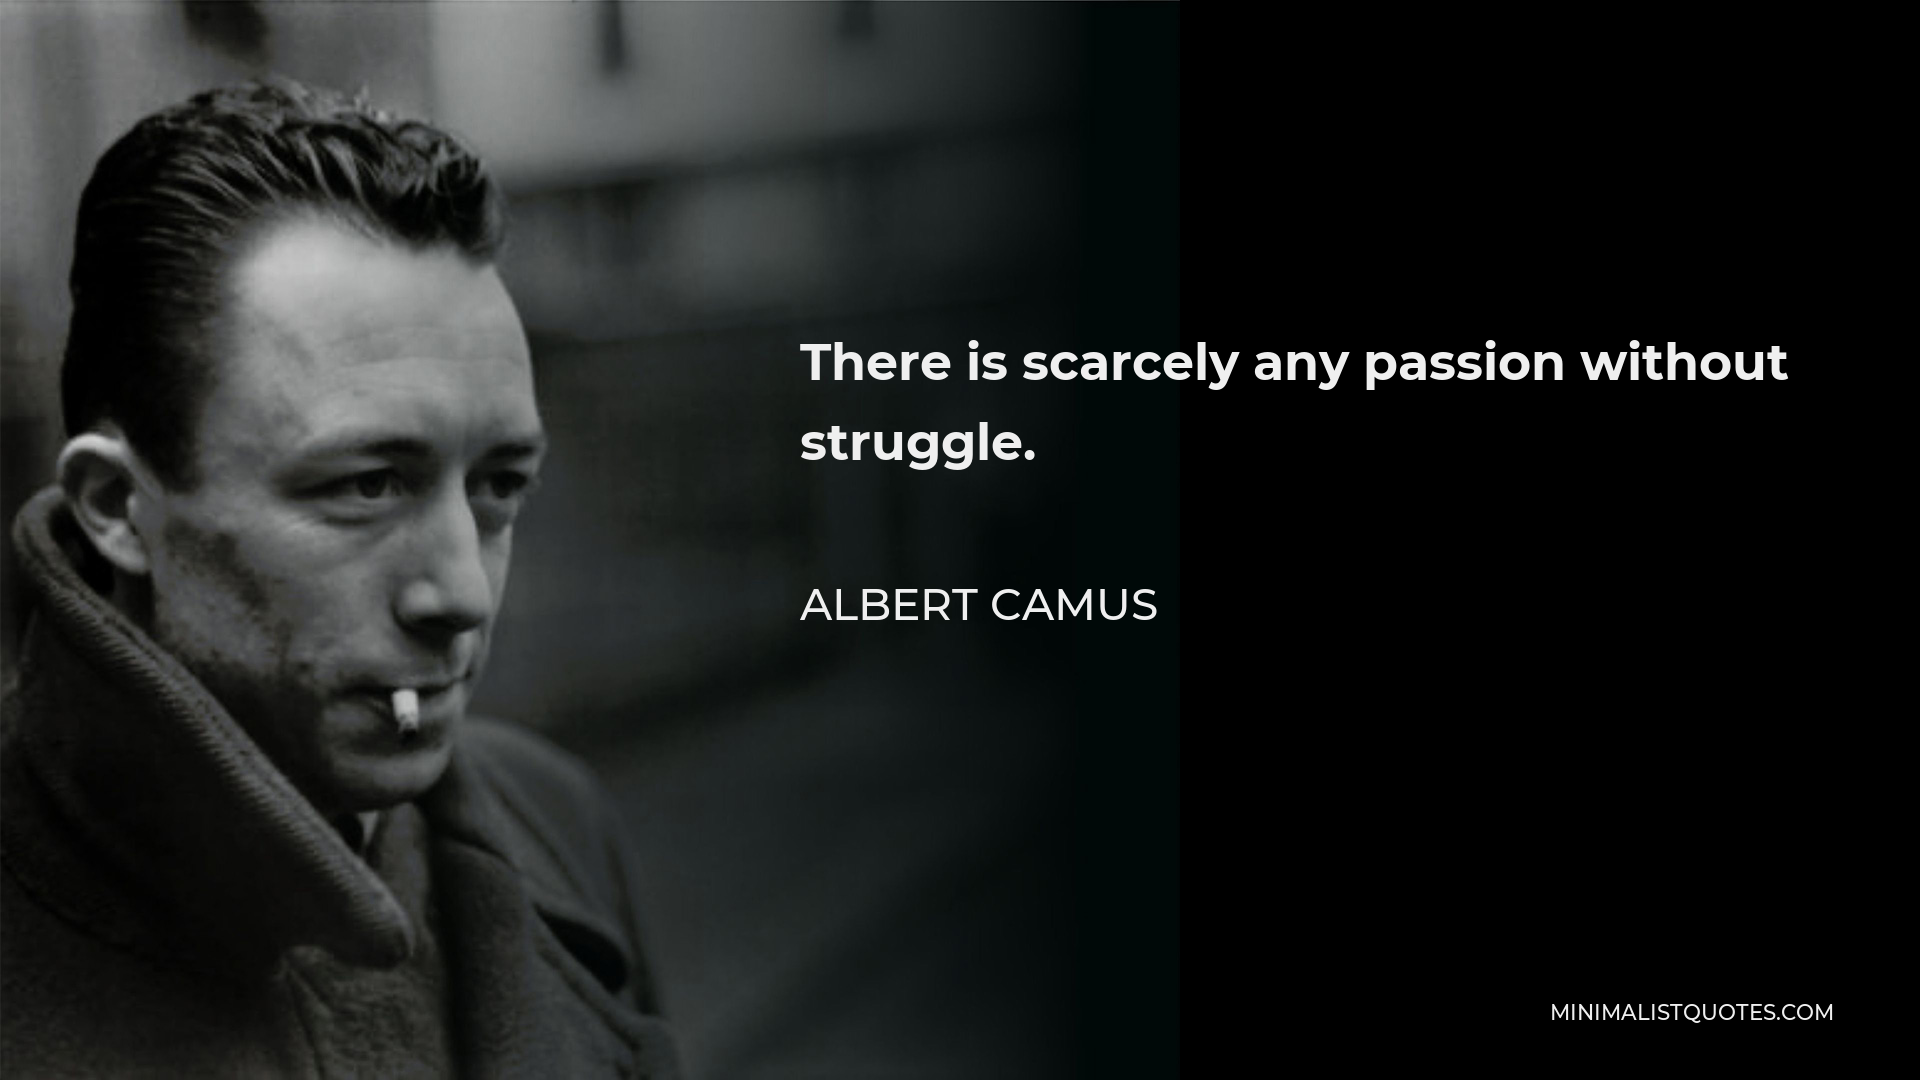 Albert Camus Quote - There is scarcely any passion without struggle.